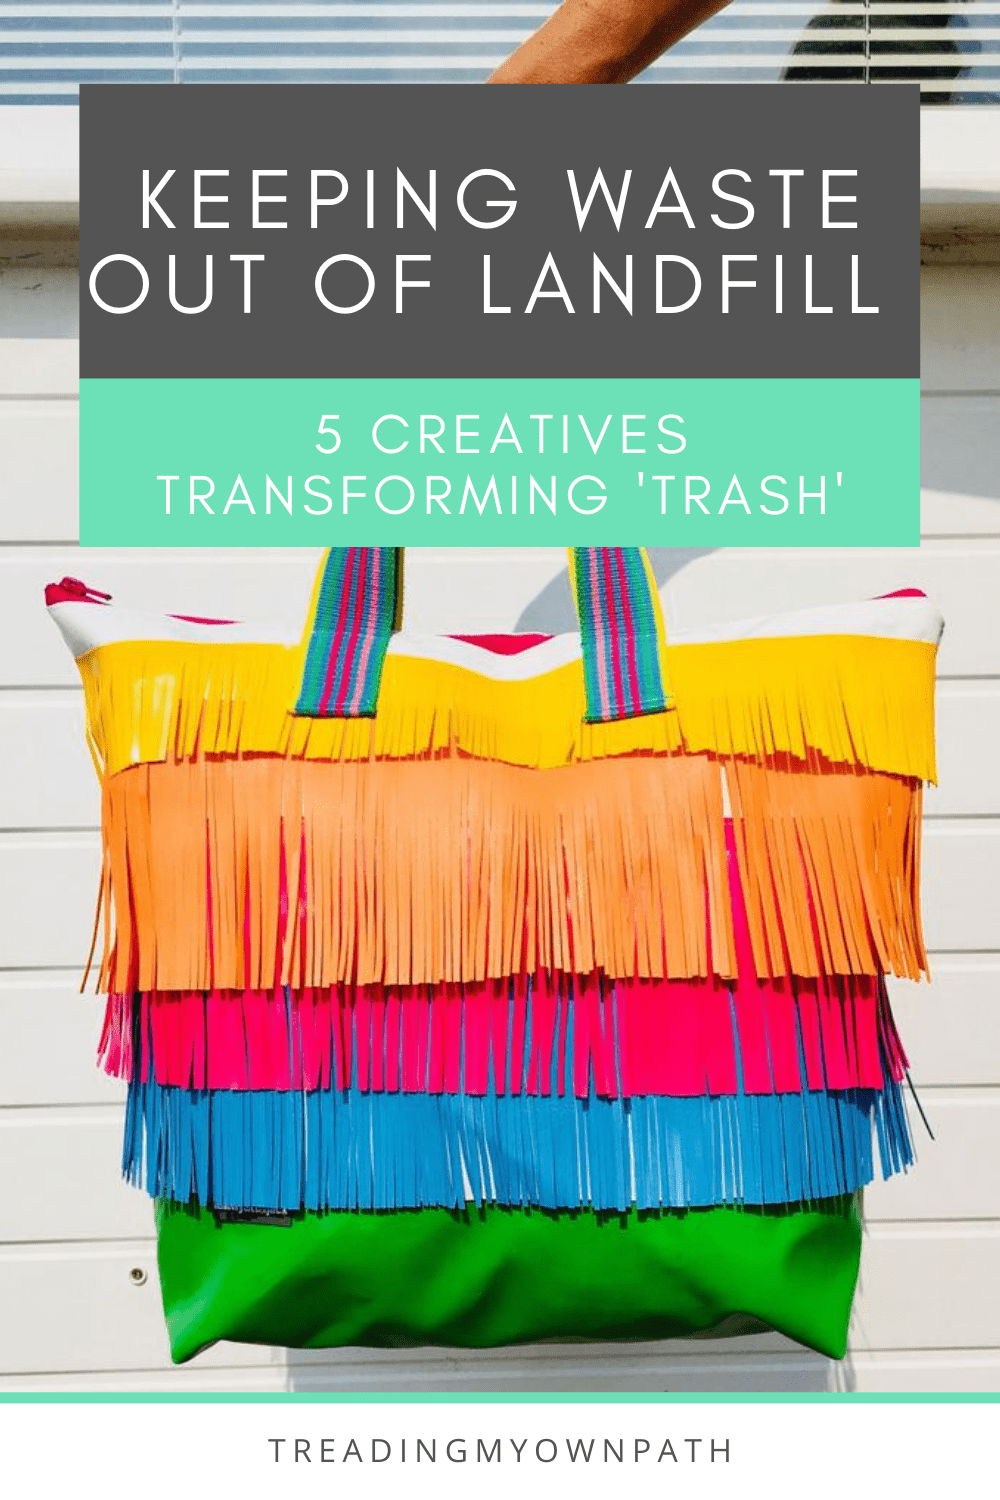 Keeping waste out of landfill: 5 creatives transforming \'trash\' into useful stuff